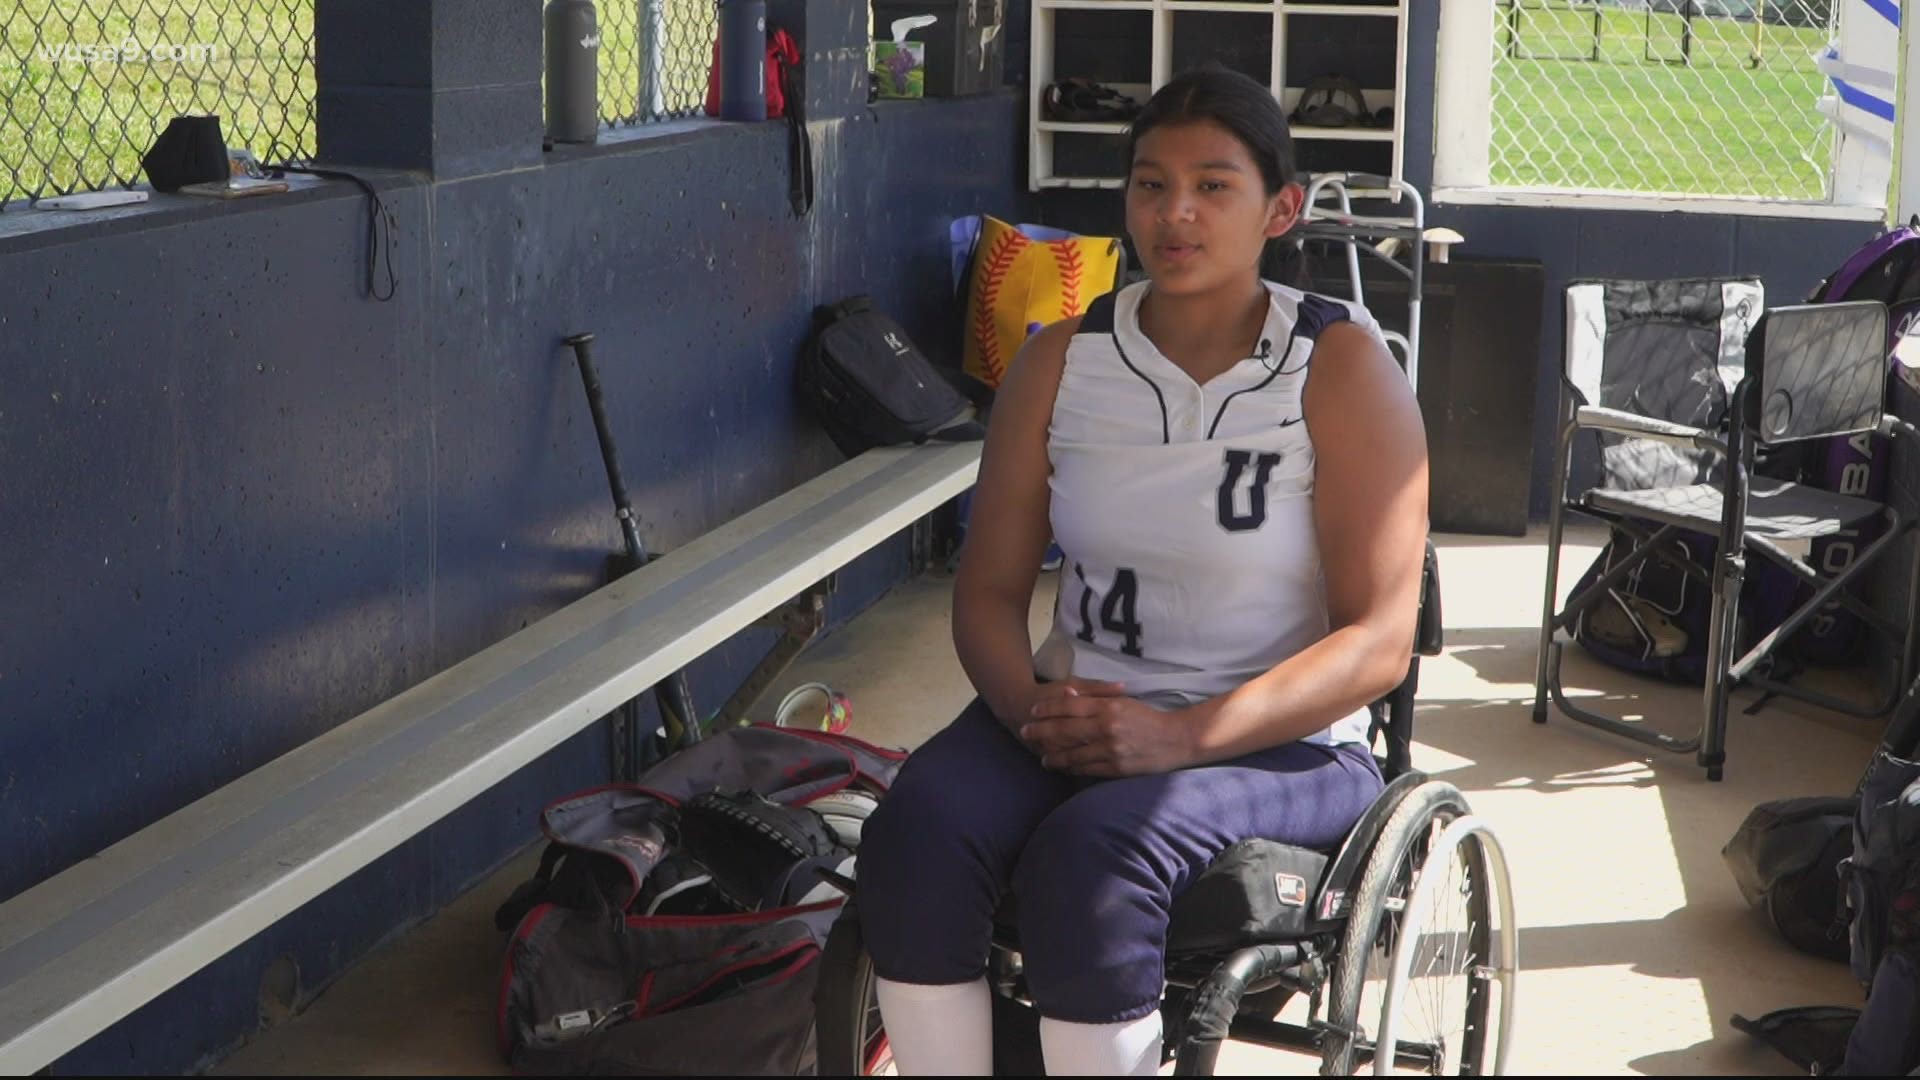 A fall from a rooftop in 2019 left Hailey Smith paralyzed from the waist down. What it didn't do was break her spirits and goals of still participating in sports.